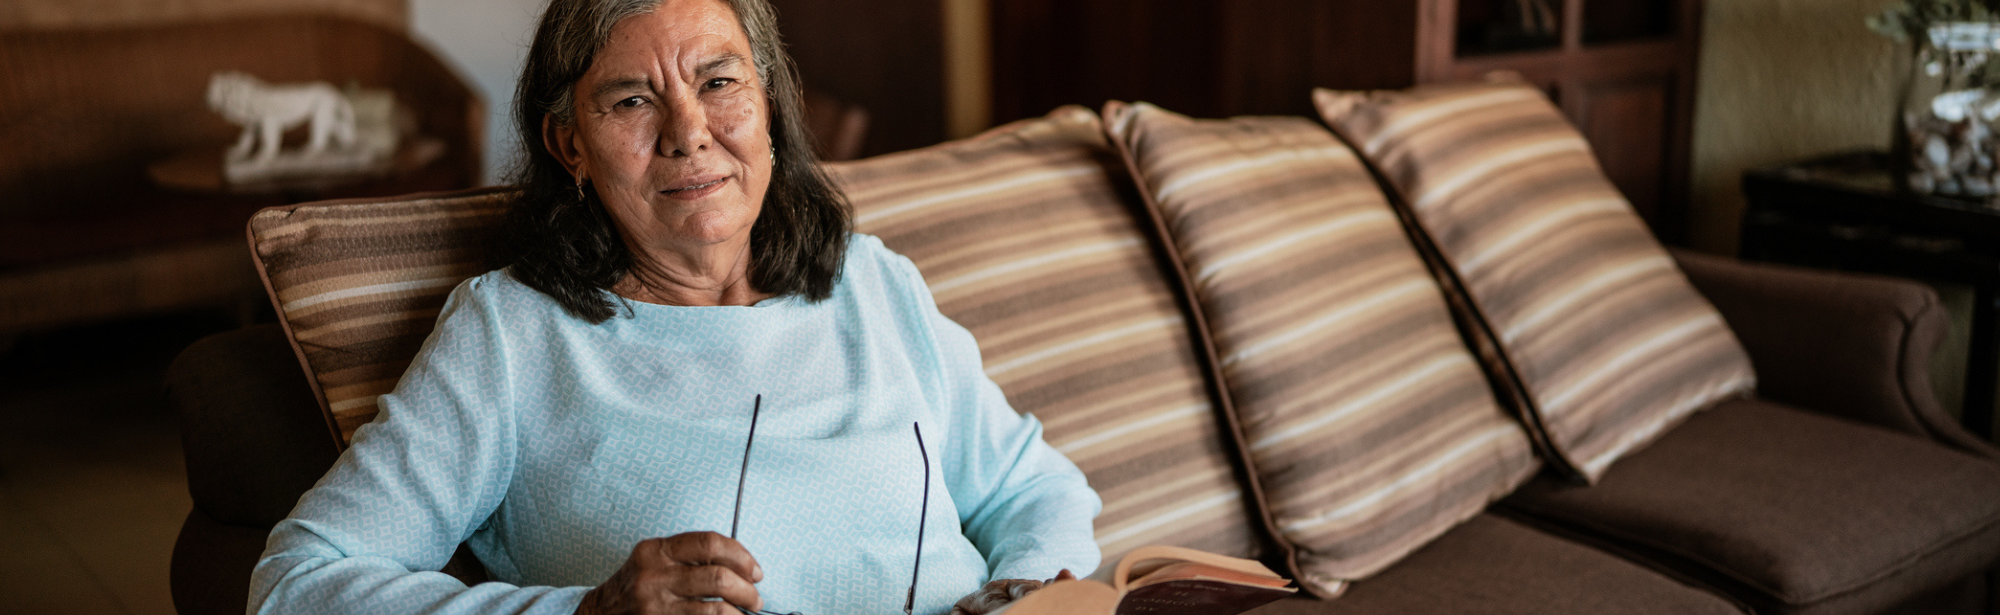 Older woman sitting on couch at home holding eyeglasses